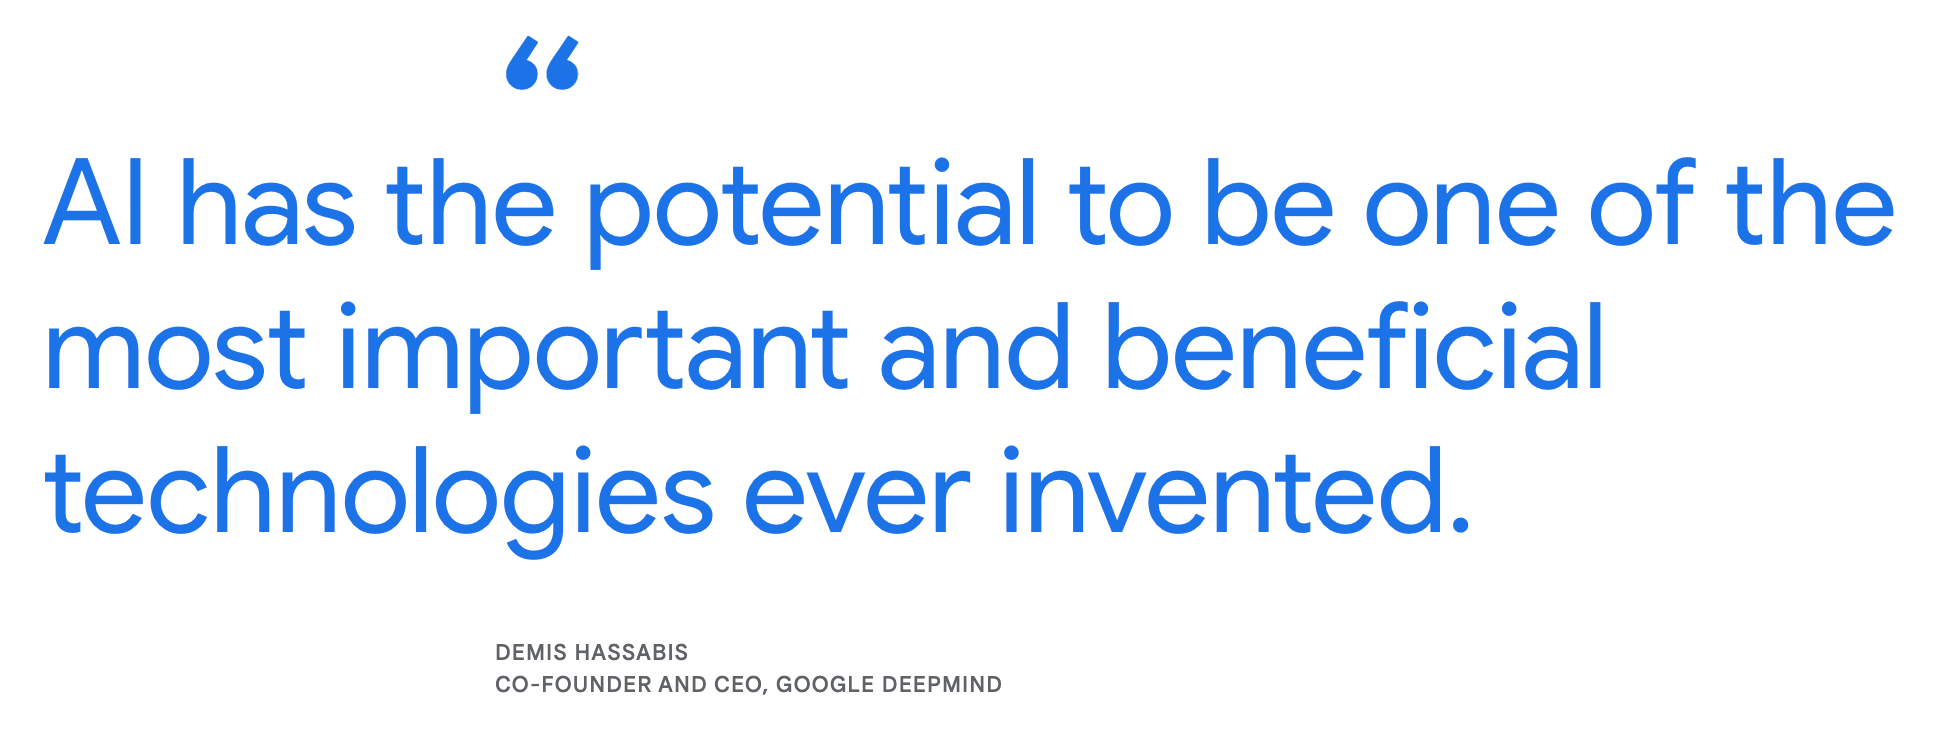 Quote form the co-founder and CEO of Google Deepmind